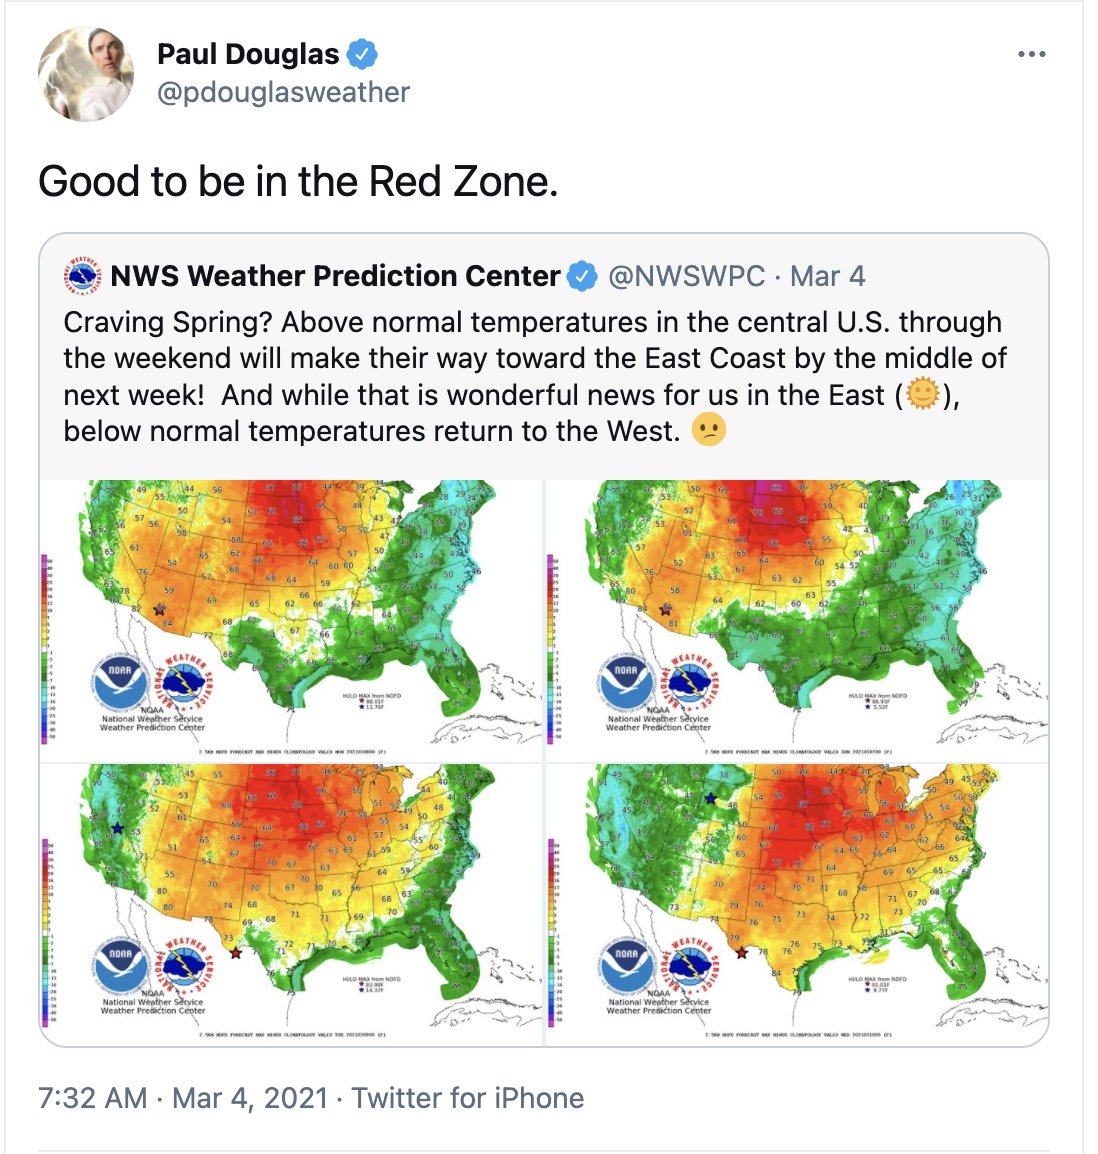 Really odd: Minnesota climate scam promoter @pdouglasweather spends a remarkable amount of time grumbling about cold weather and expressing joy about warmer-than-average weather. https://t.co/GIMUTcH8cH